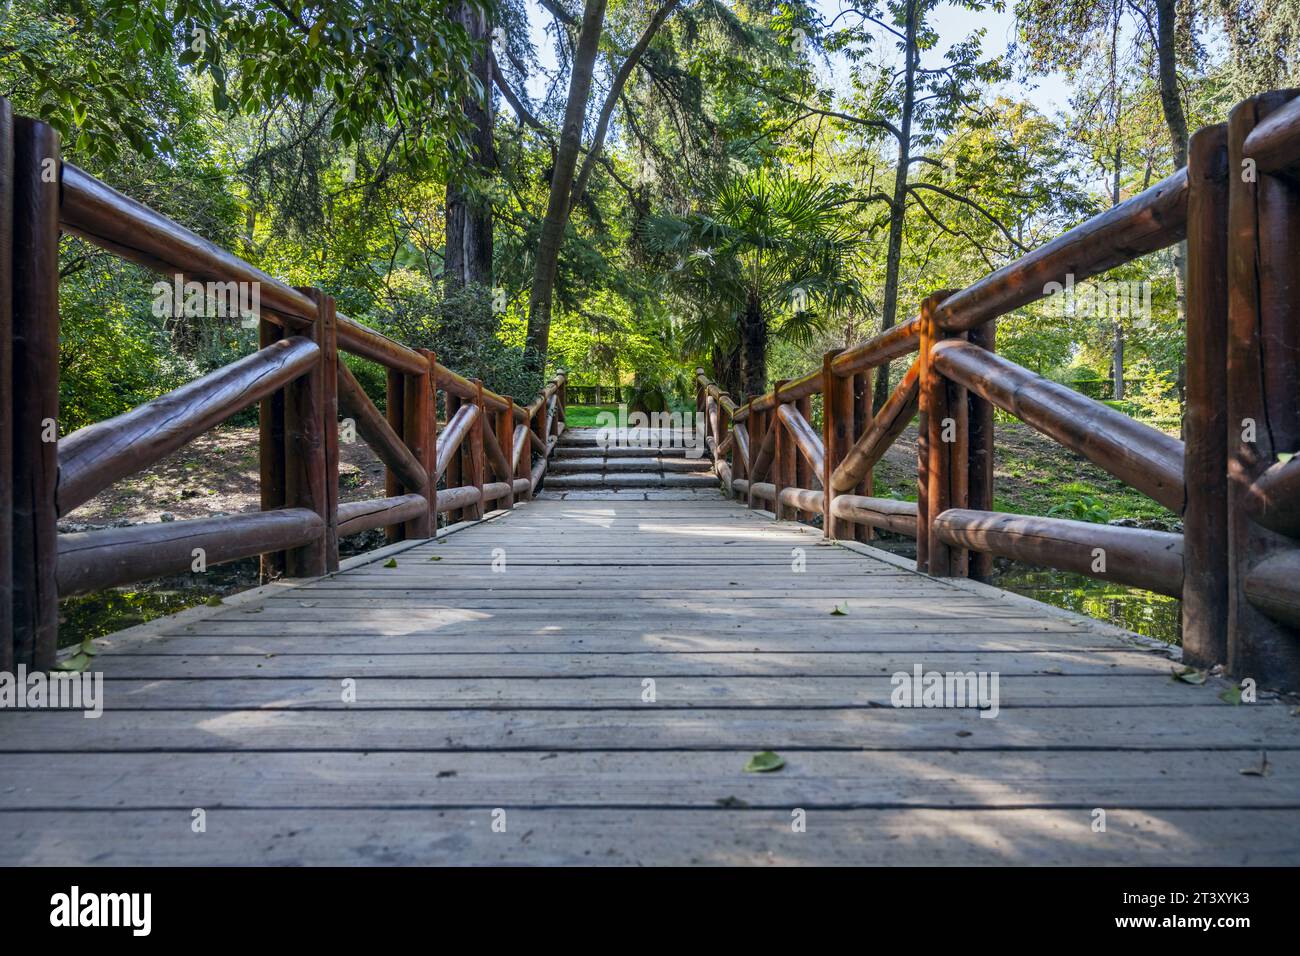 A rustic wooden bridge with log railings over a small stream in a heavily vegetated area within an urban park Stock Photo